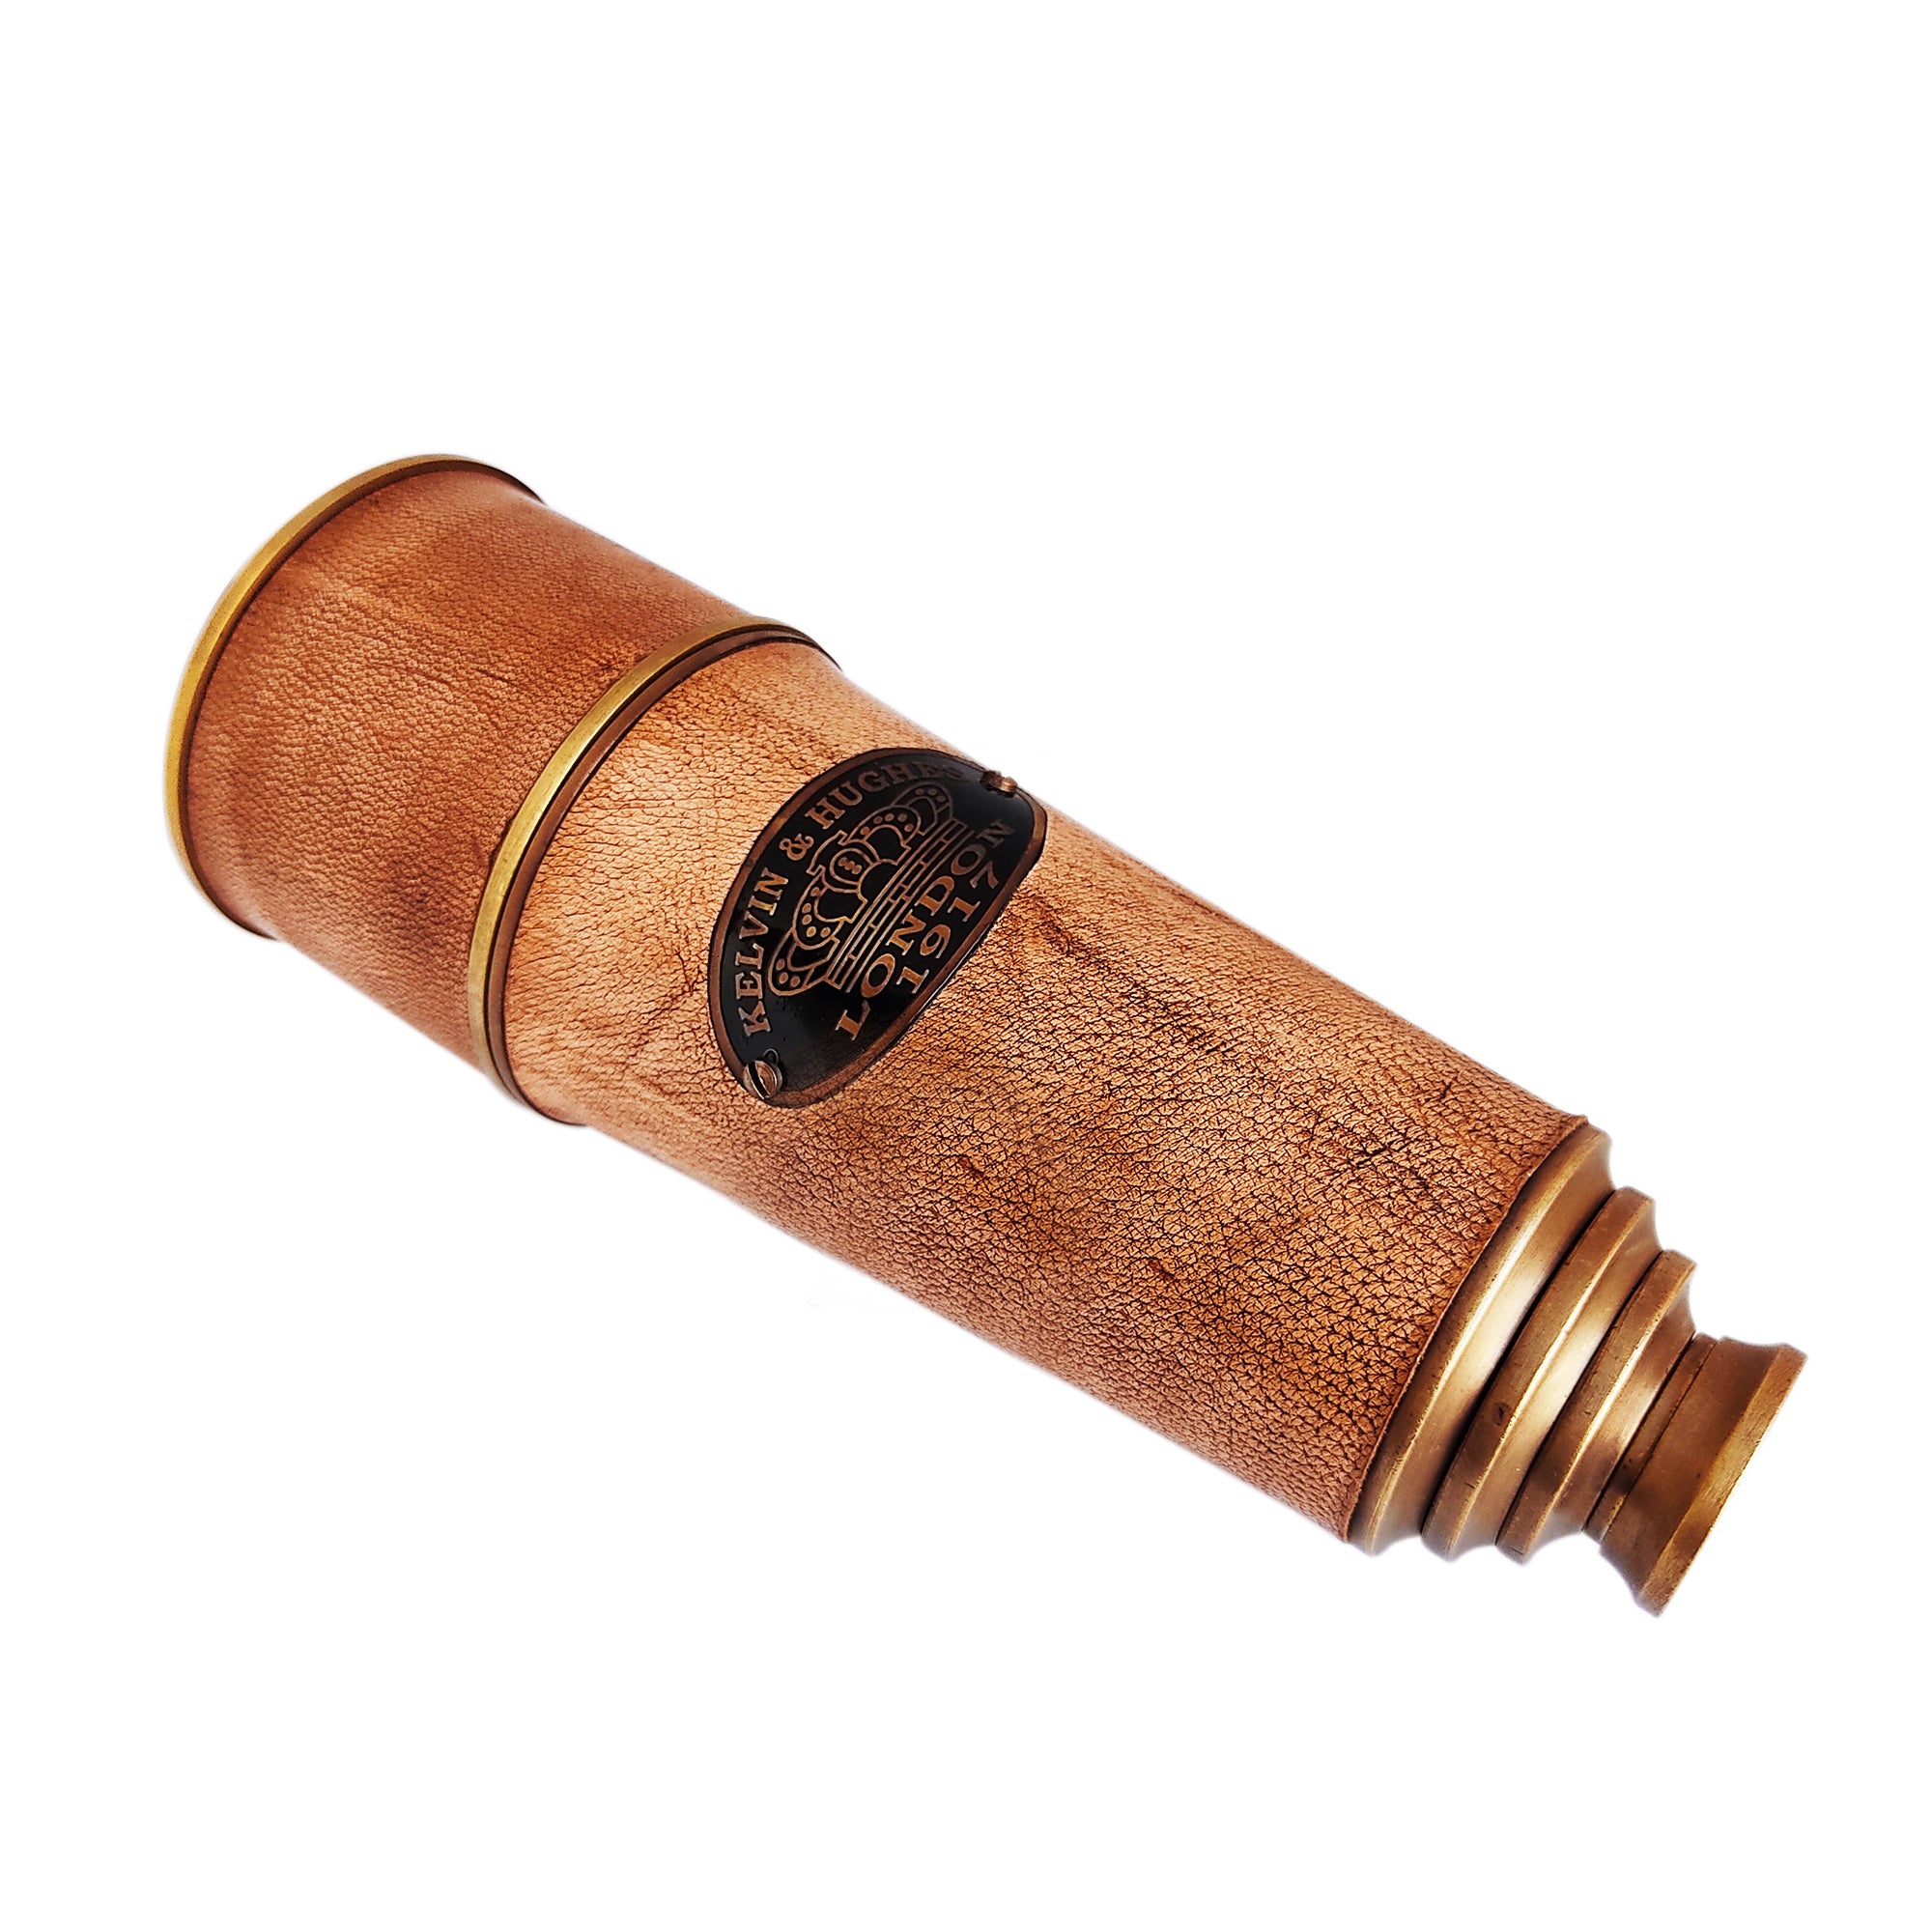 Copy of special Engraved Nautical Pirate Spyglass handheld Brass marine Antique Telescope with wooden gift box